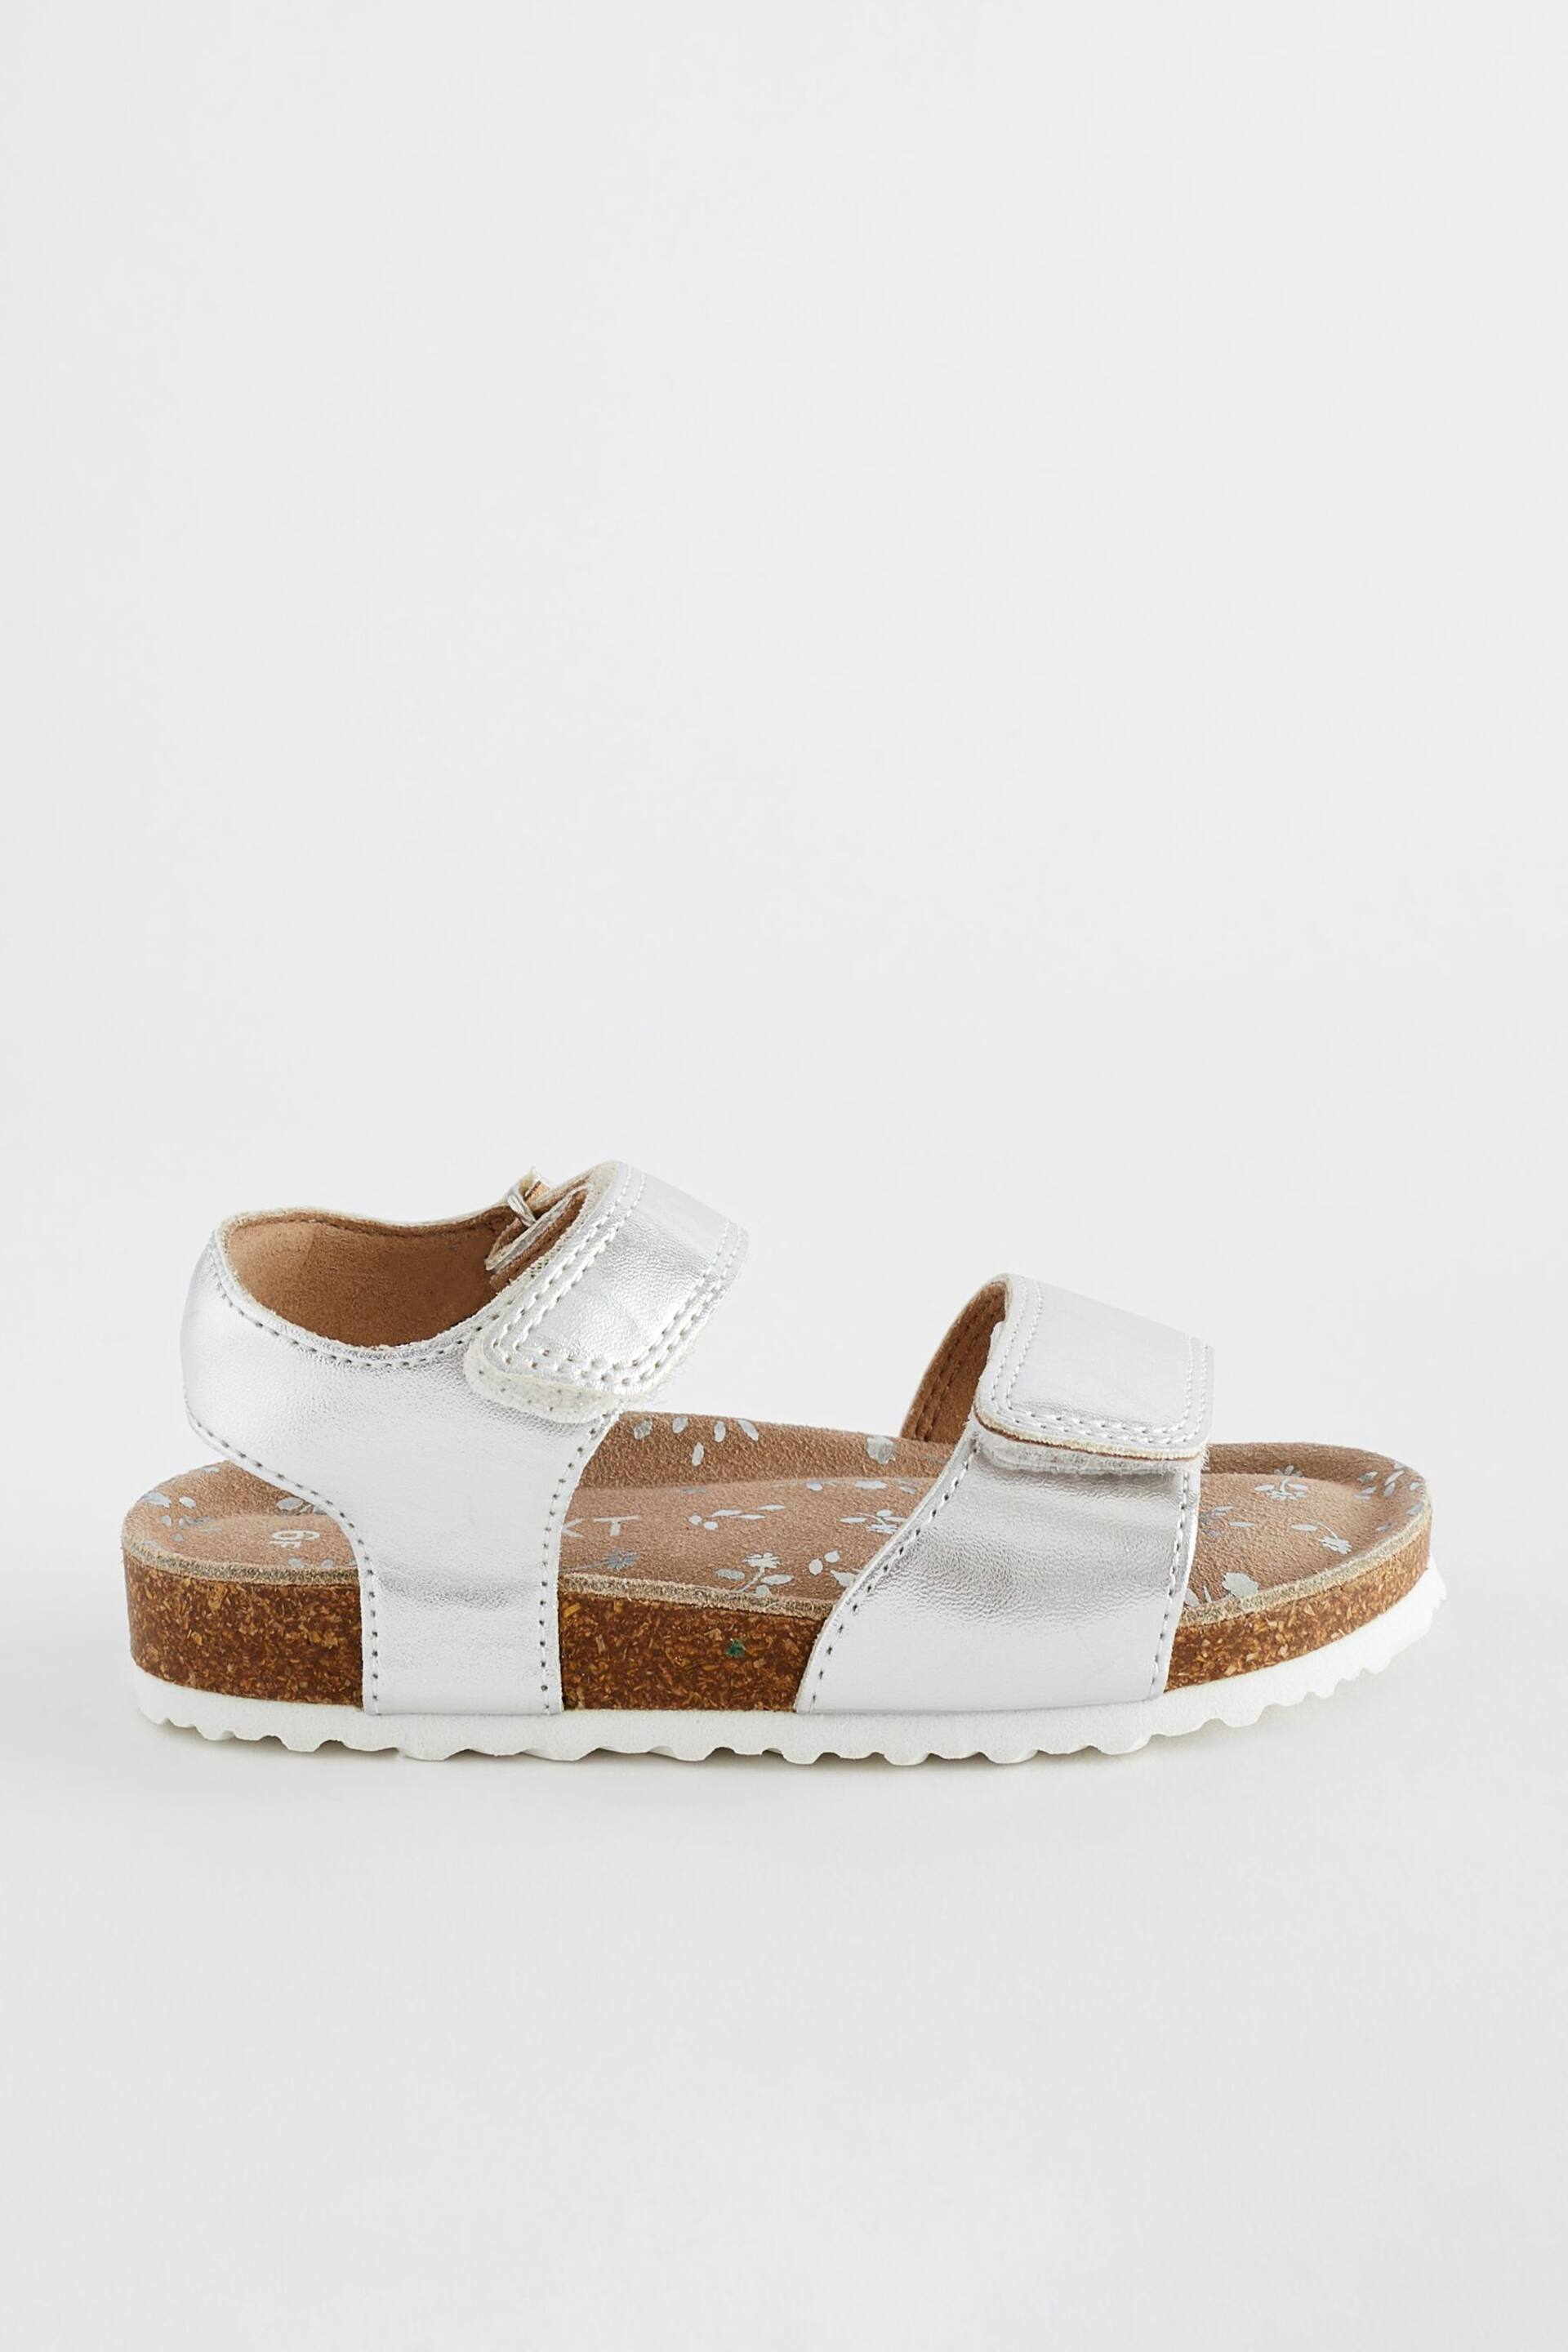 Silver Standard Fit (F) Leather Corkbed Sandals - Image 2 of 6